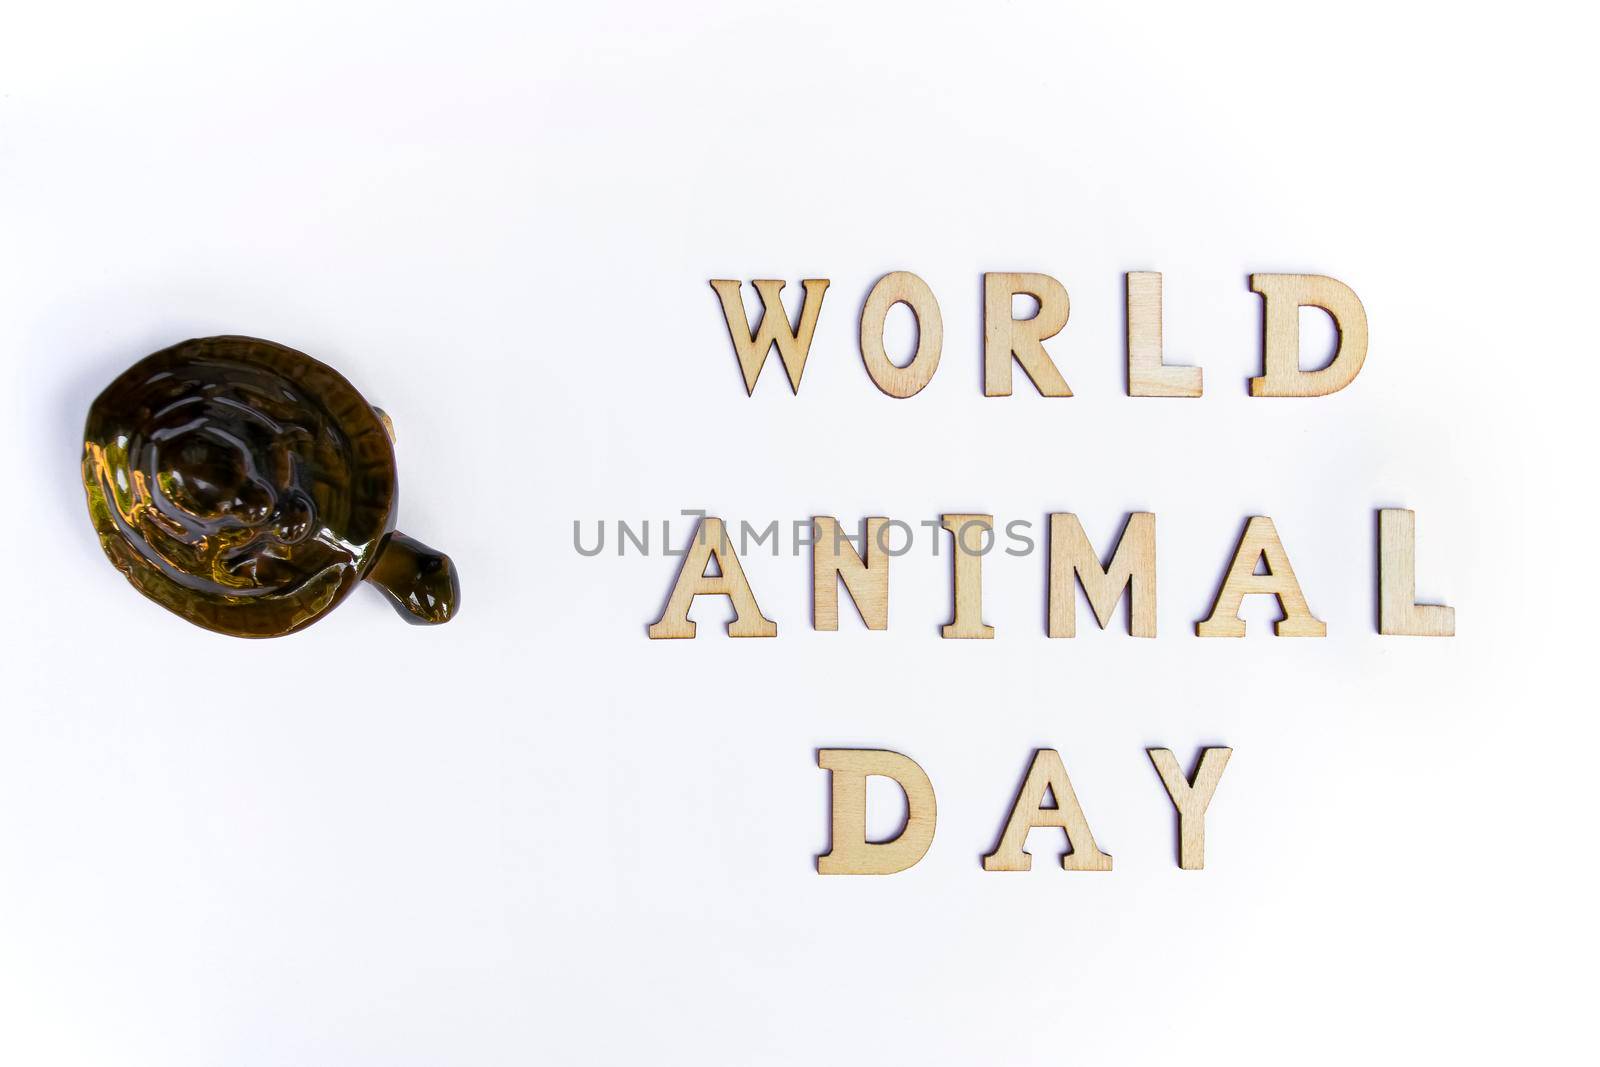 World animal day concept with turtle. by GraffiTimi